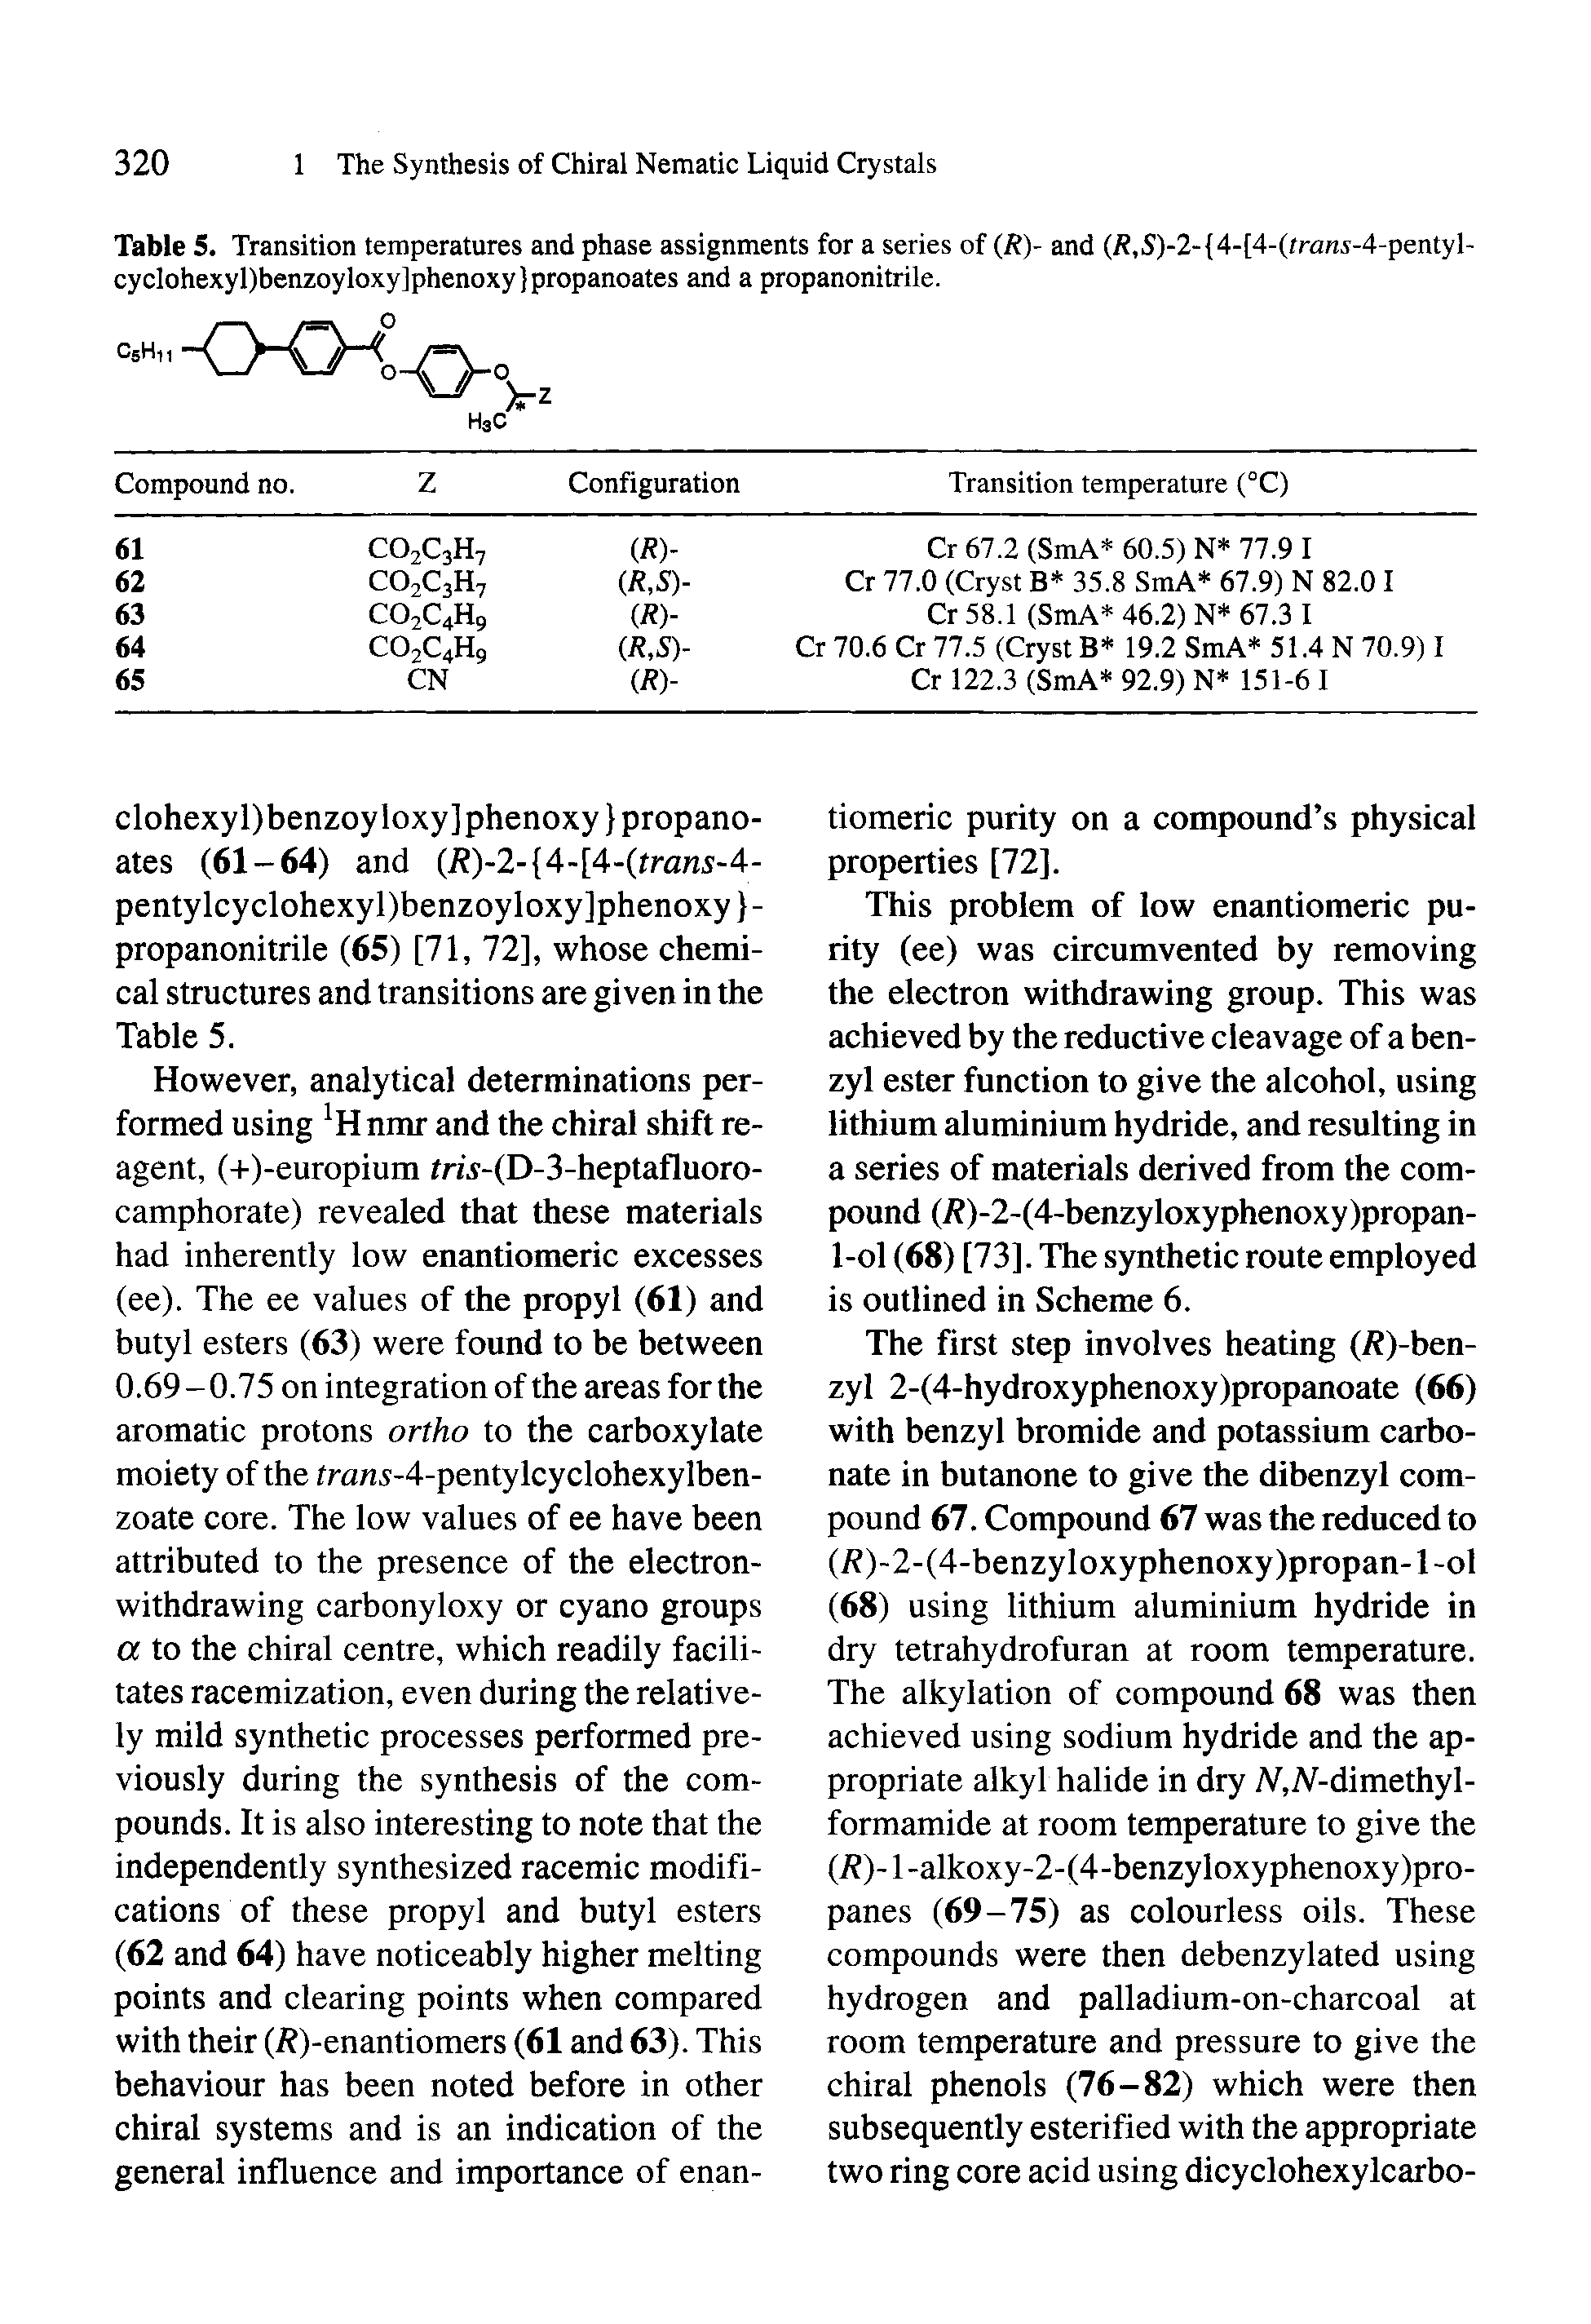 Table 5. Transition temperatures and phase assignments for a series of (R)- and (f ,S)-2- 4-[4-(frani-4-pentyl-cyclohexyl)benzoyloxy]phenoxy propanoates and a propanonitrile.